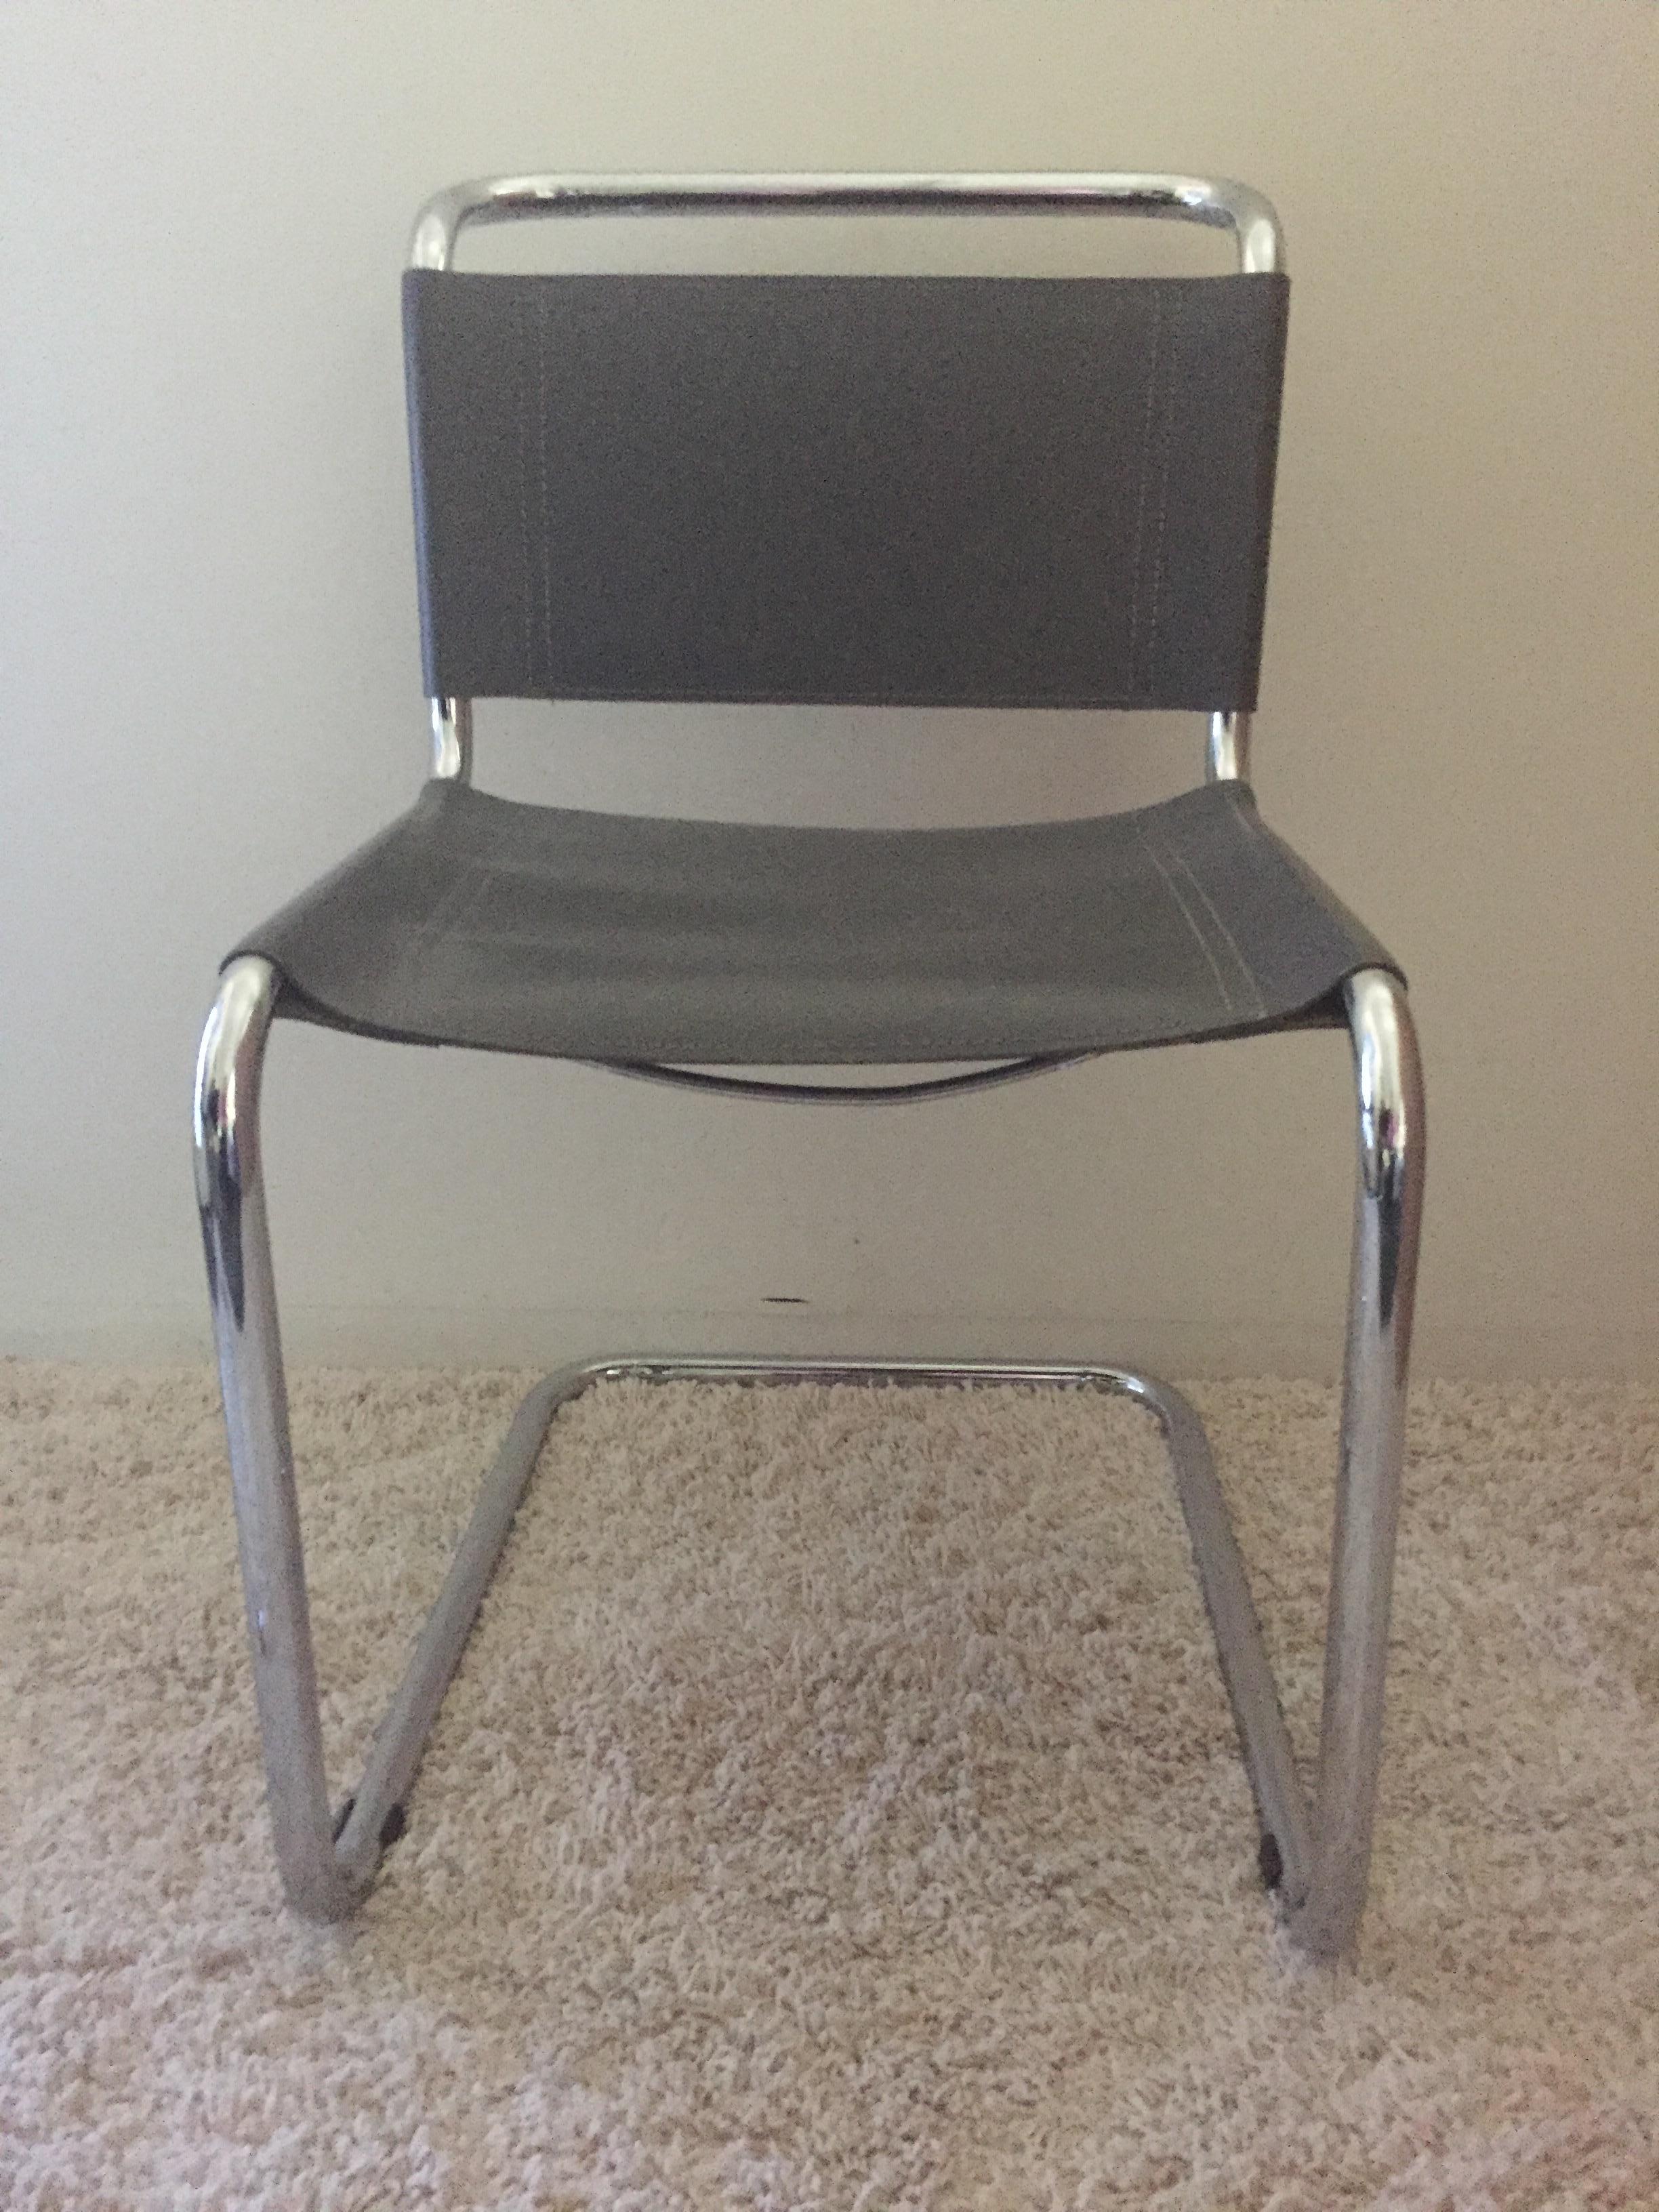 Glazed Mart Stam Pair of Tubular Chrome and Grey Leather Chairs